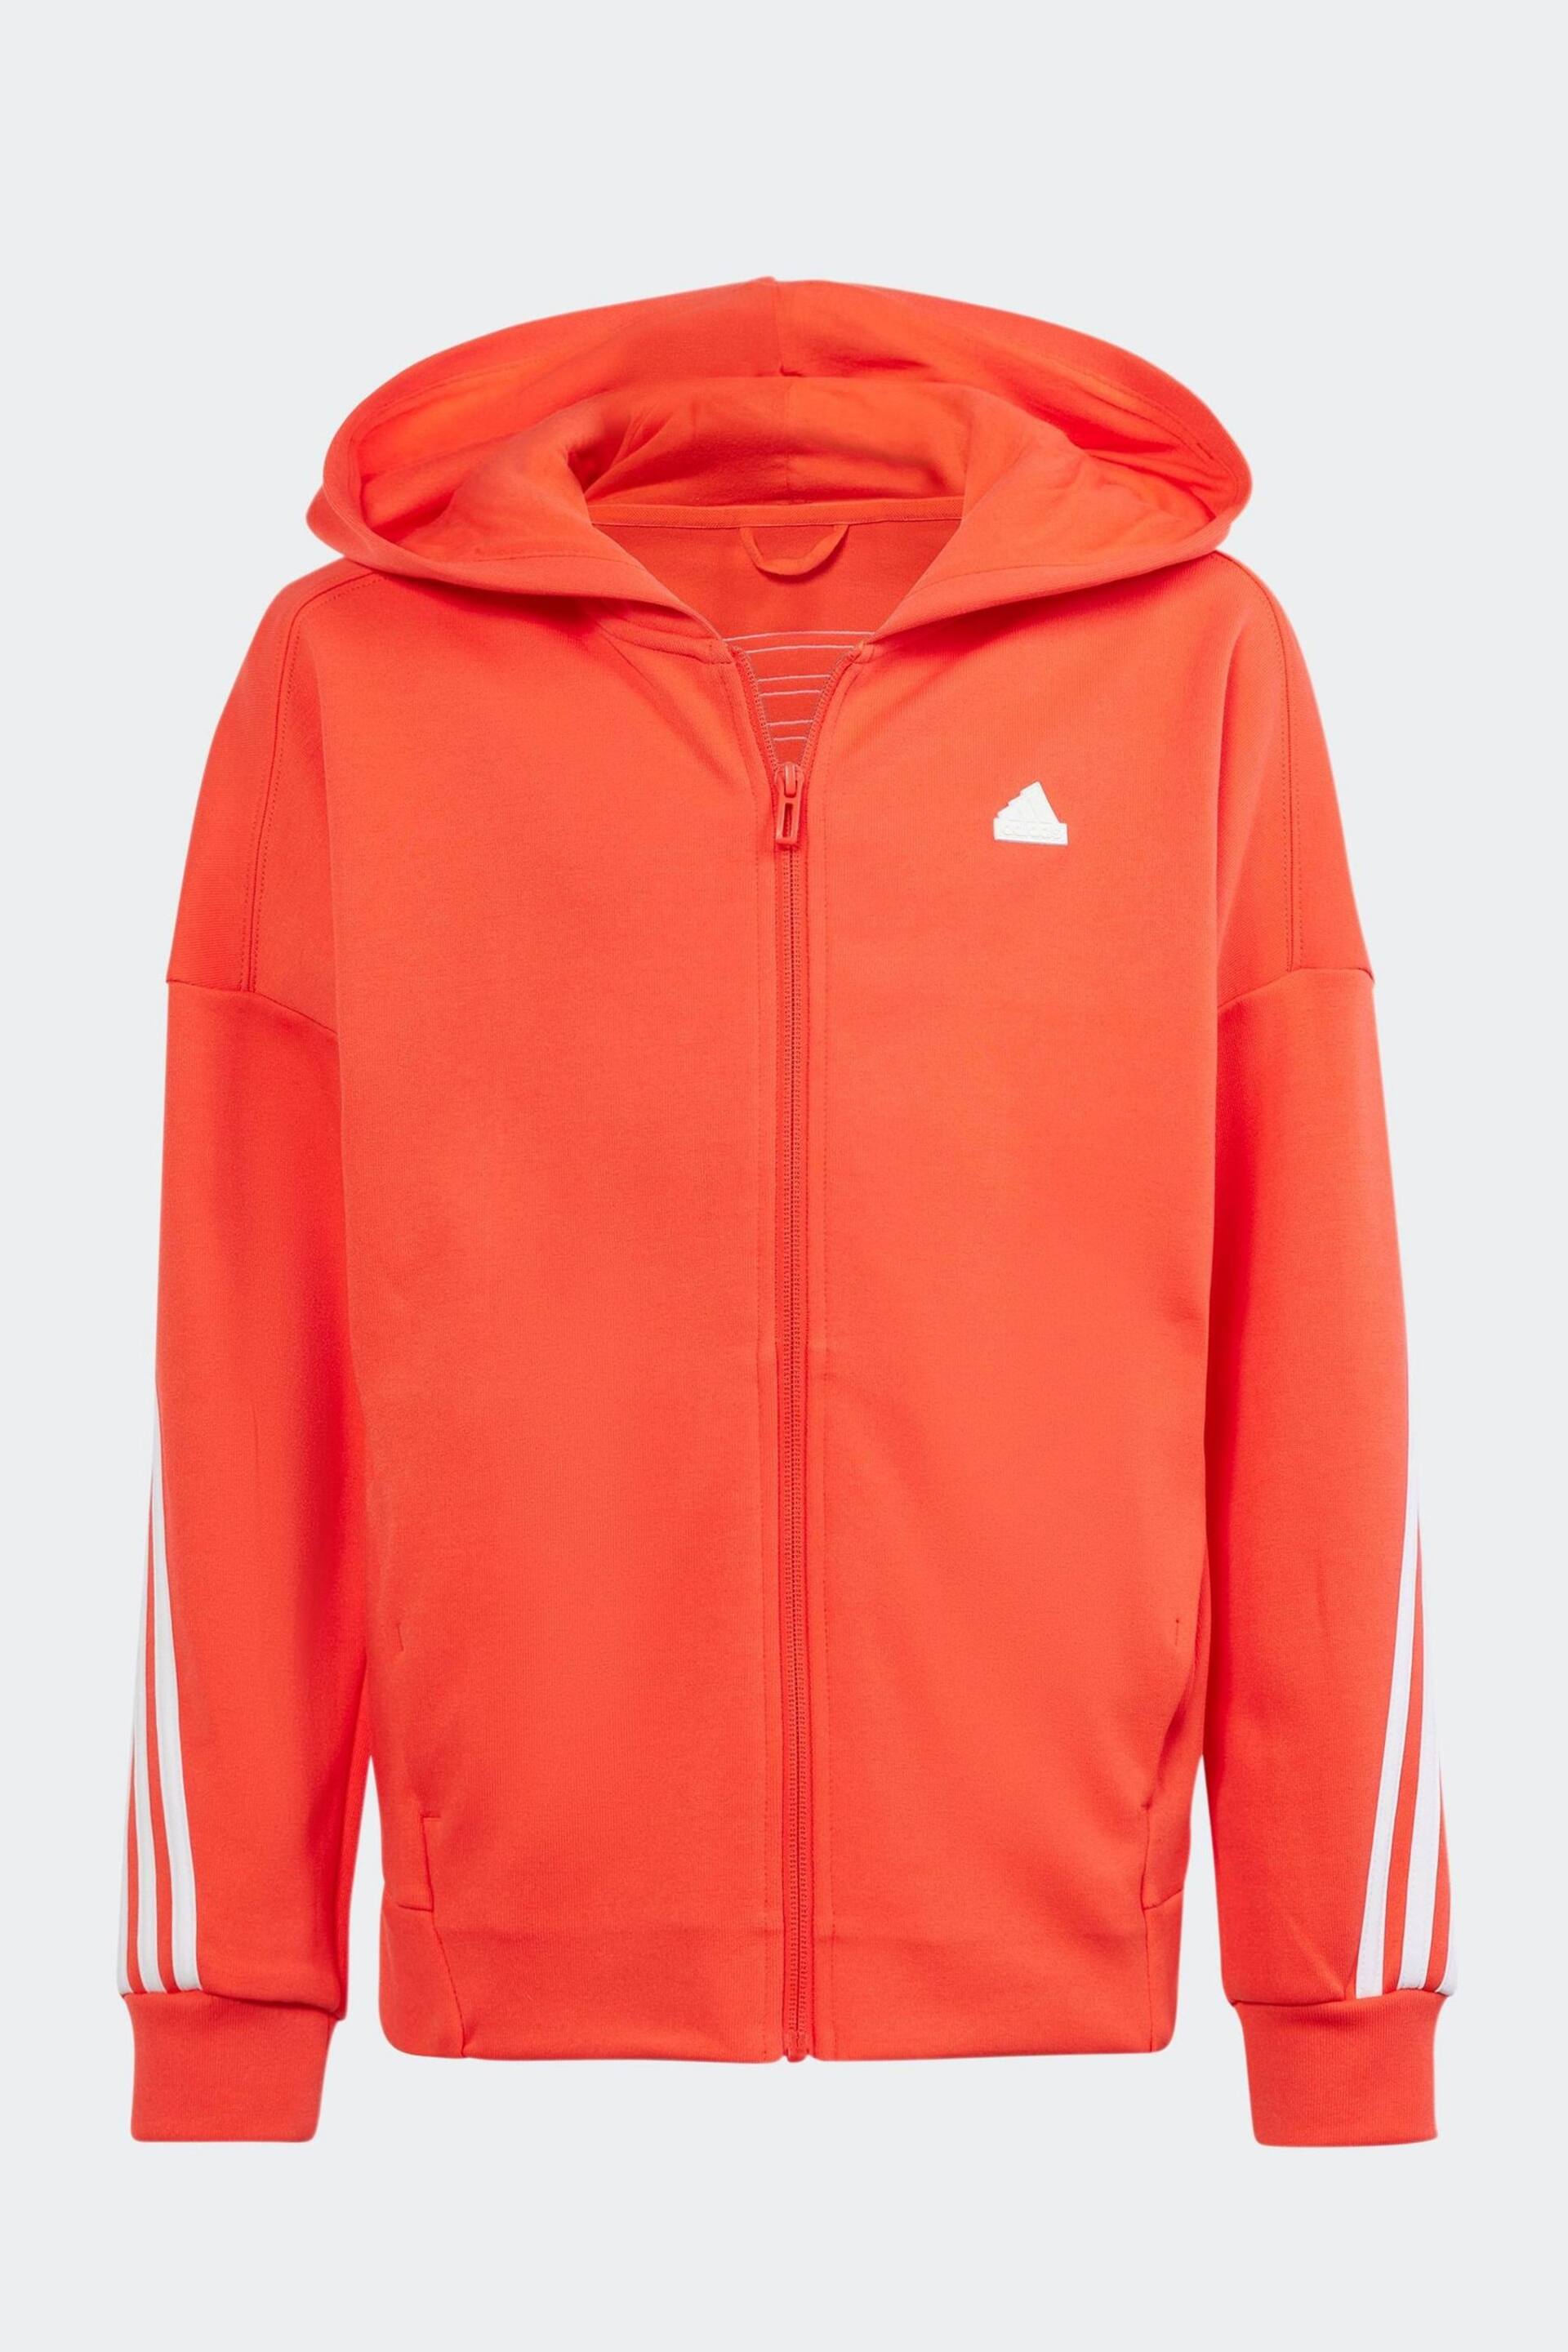 adidas Red Sportswear Future Icons 3-Stripes Full-Zip Hooded Track Top - Image 1 of 5